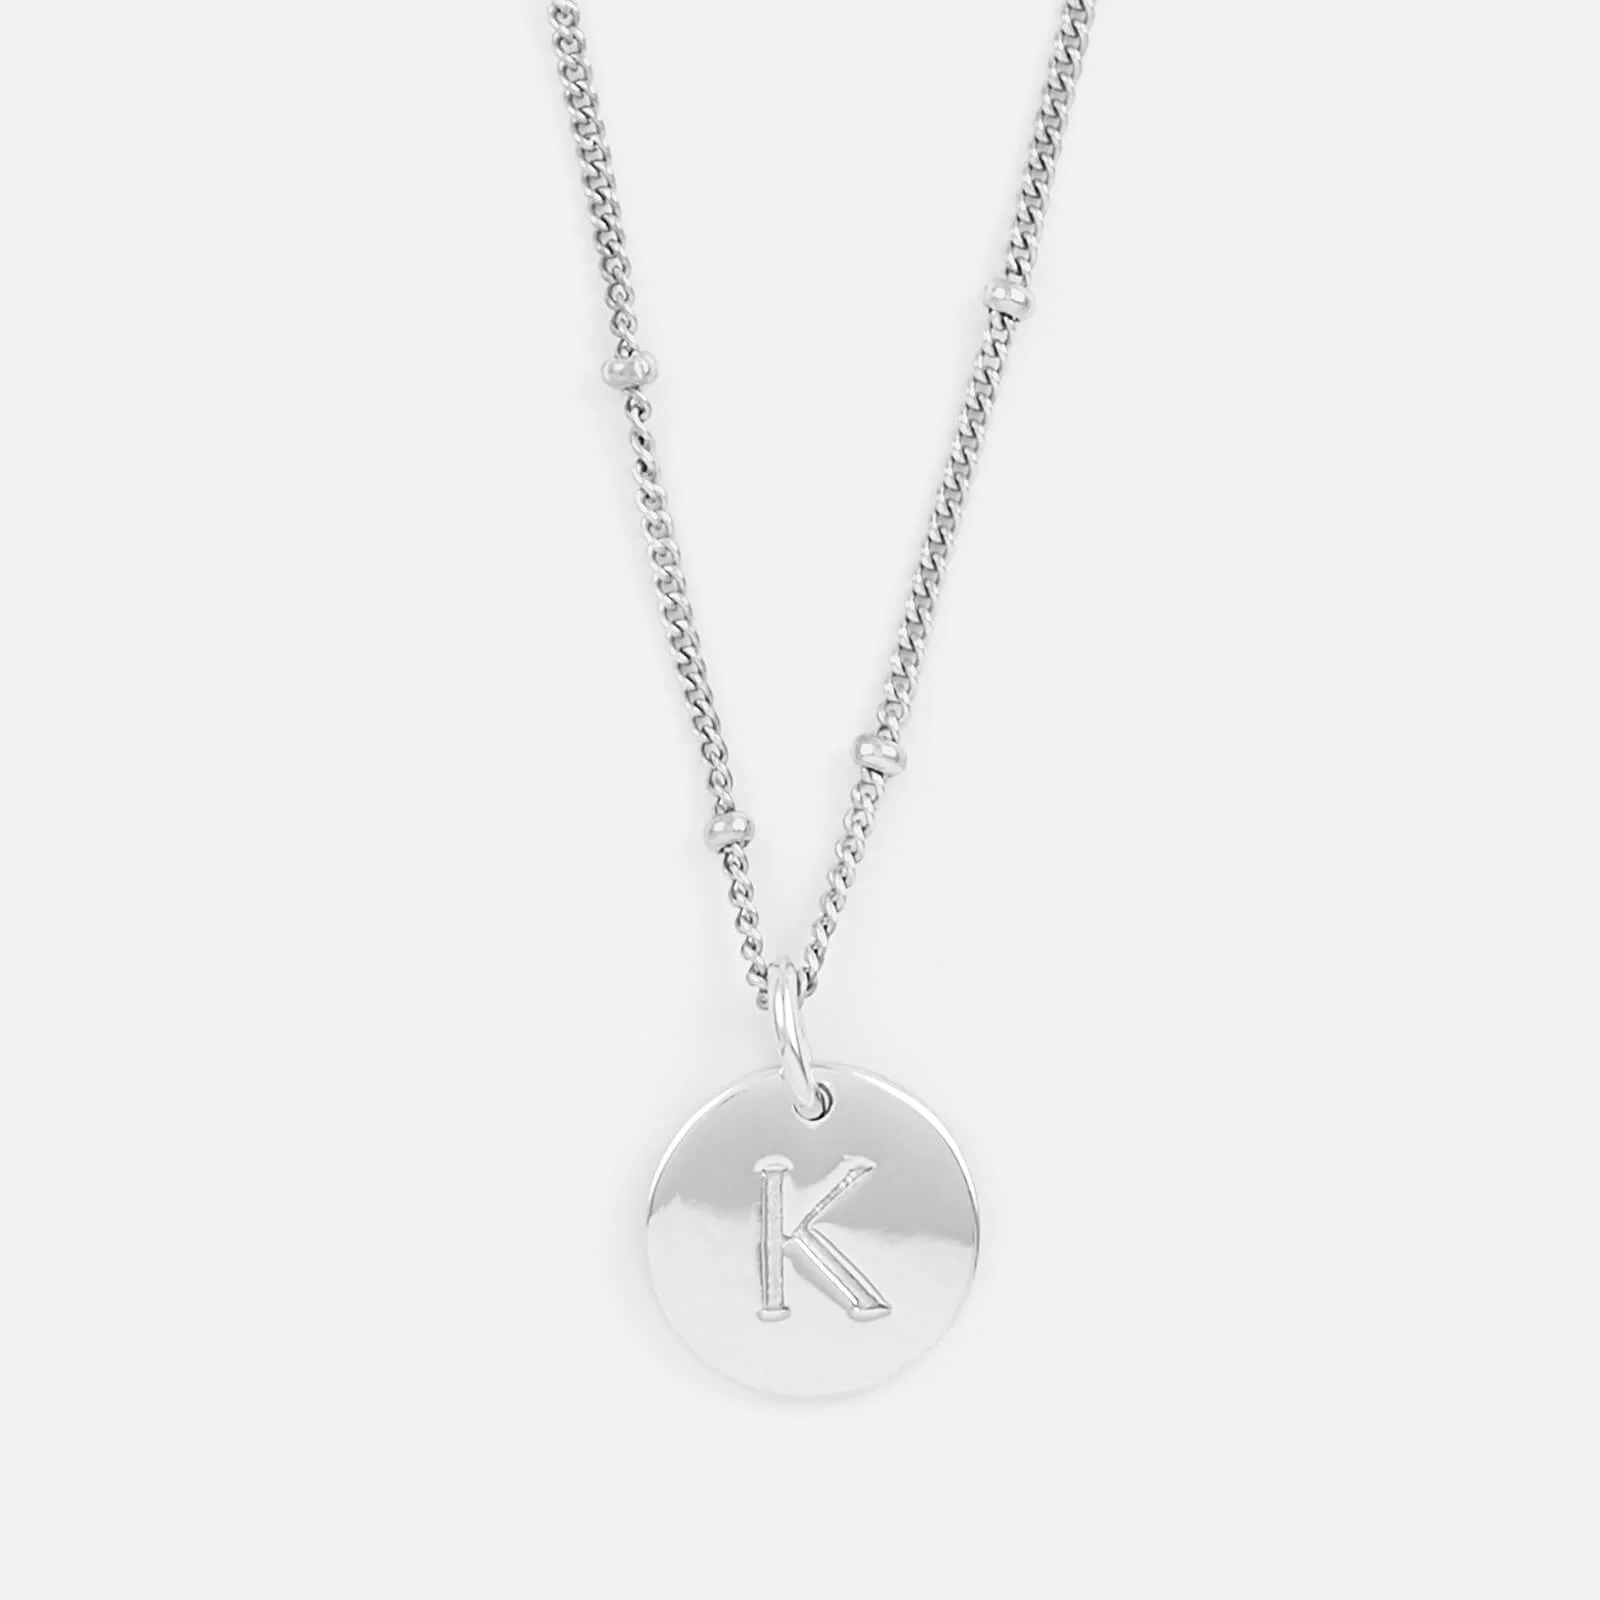 Missoma Women's Silver 'K' Initial Necklace - Silver Image 1